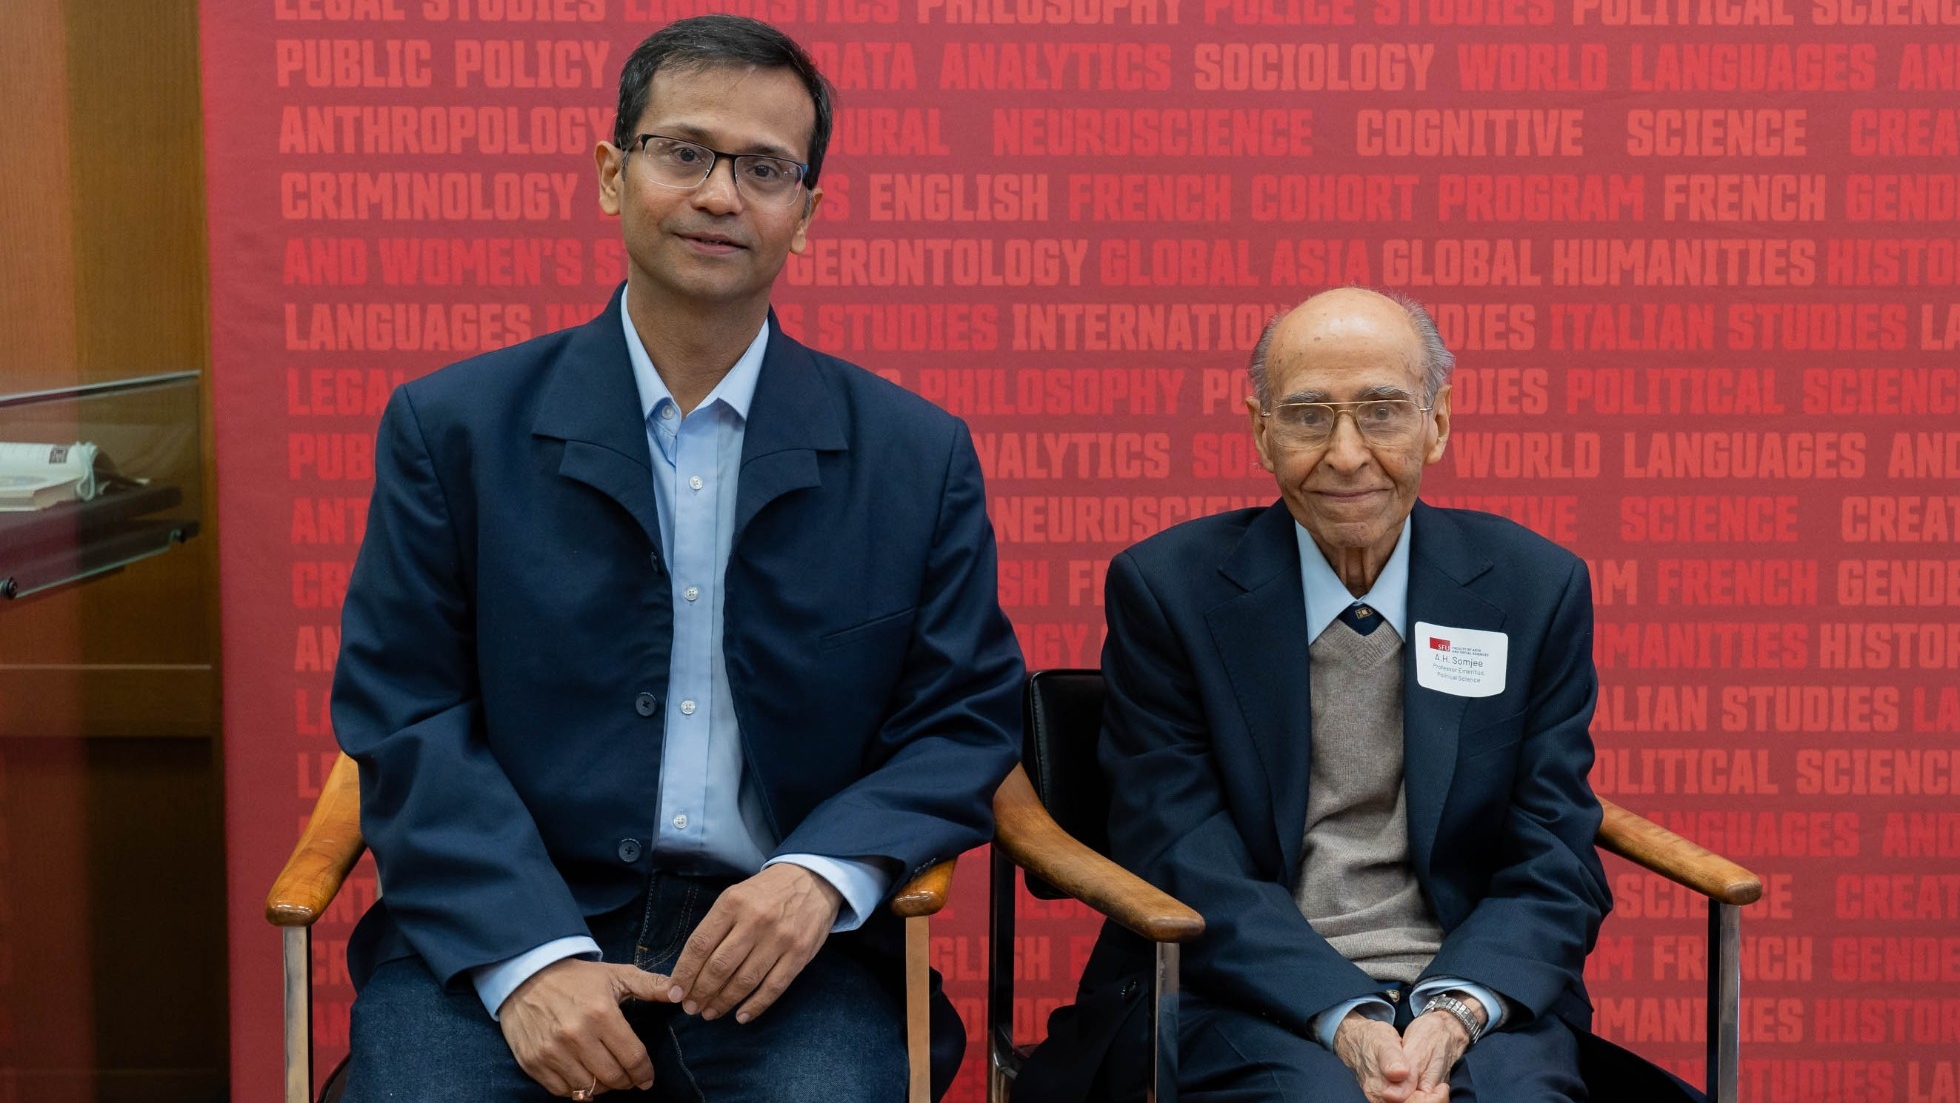 Shivaji Mukherjee and Dr. A.H. Somjee photographed sitting in front of the Faculty of Arts and Social Sciences banner at the Professorship launch event. Shivaji, pictured on the left, is has black hair and wears black glasses. He is wearing a light blue shirt with a navy coat. Dr. A.H. Somjee pictured on the right, smiles at the camera. He is wearing a brown sweater, a navy coat, and glasses.